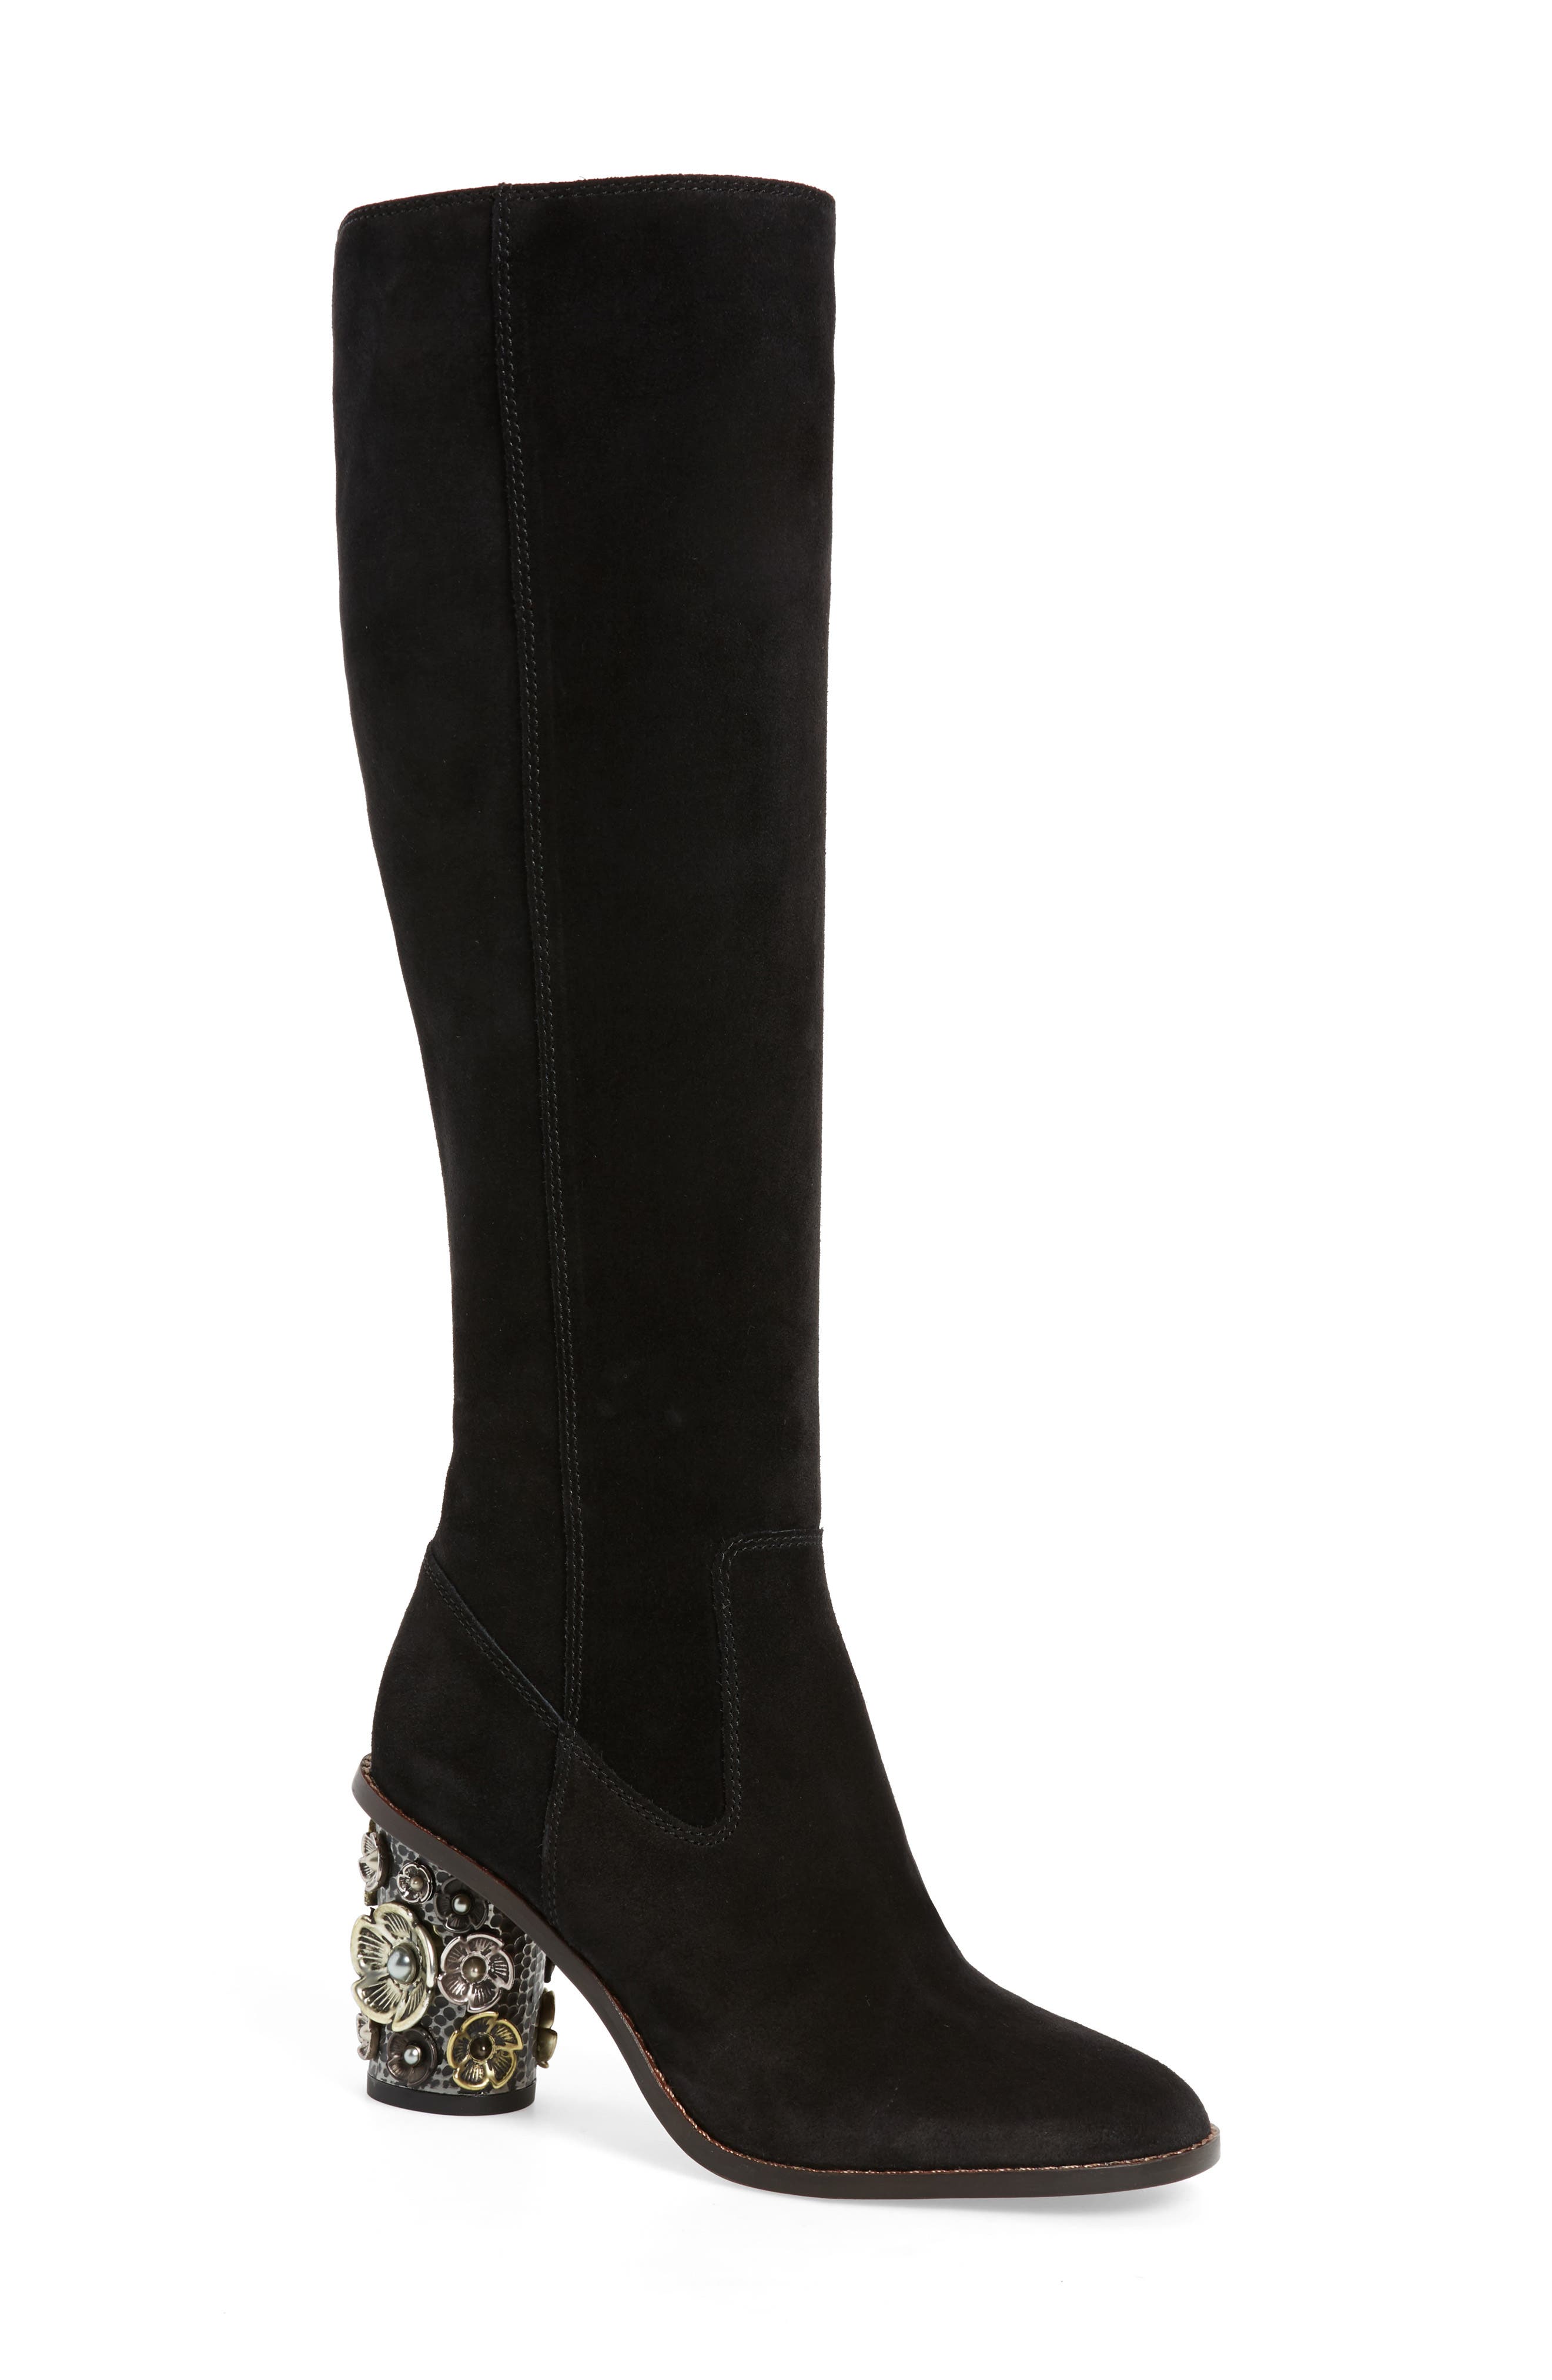 bogs women's snowday tall boot